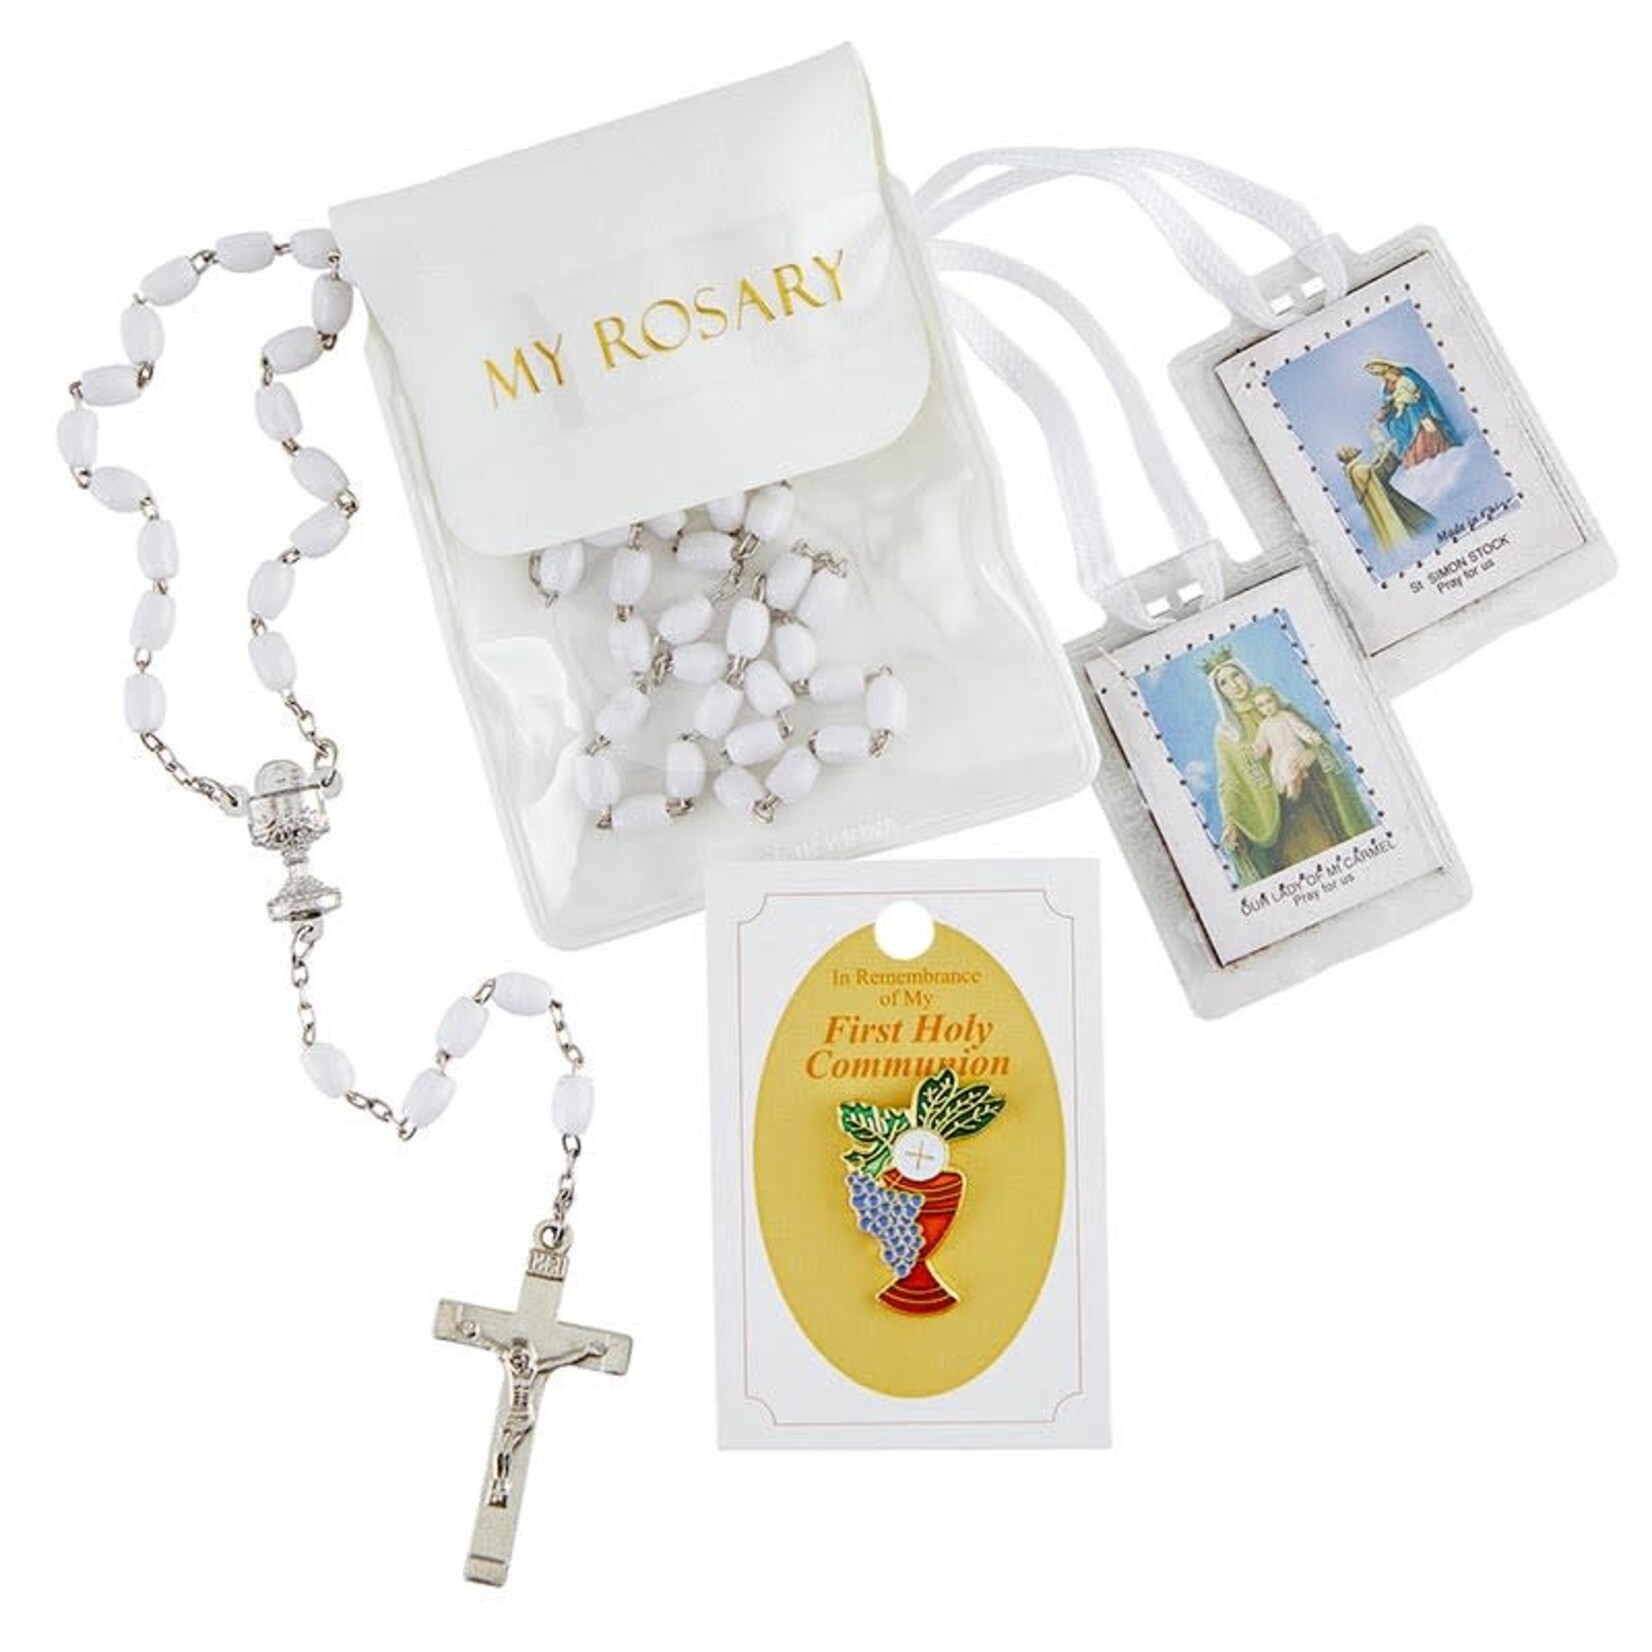 First Communion Accessory Kit